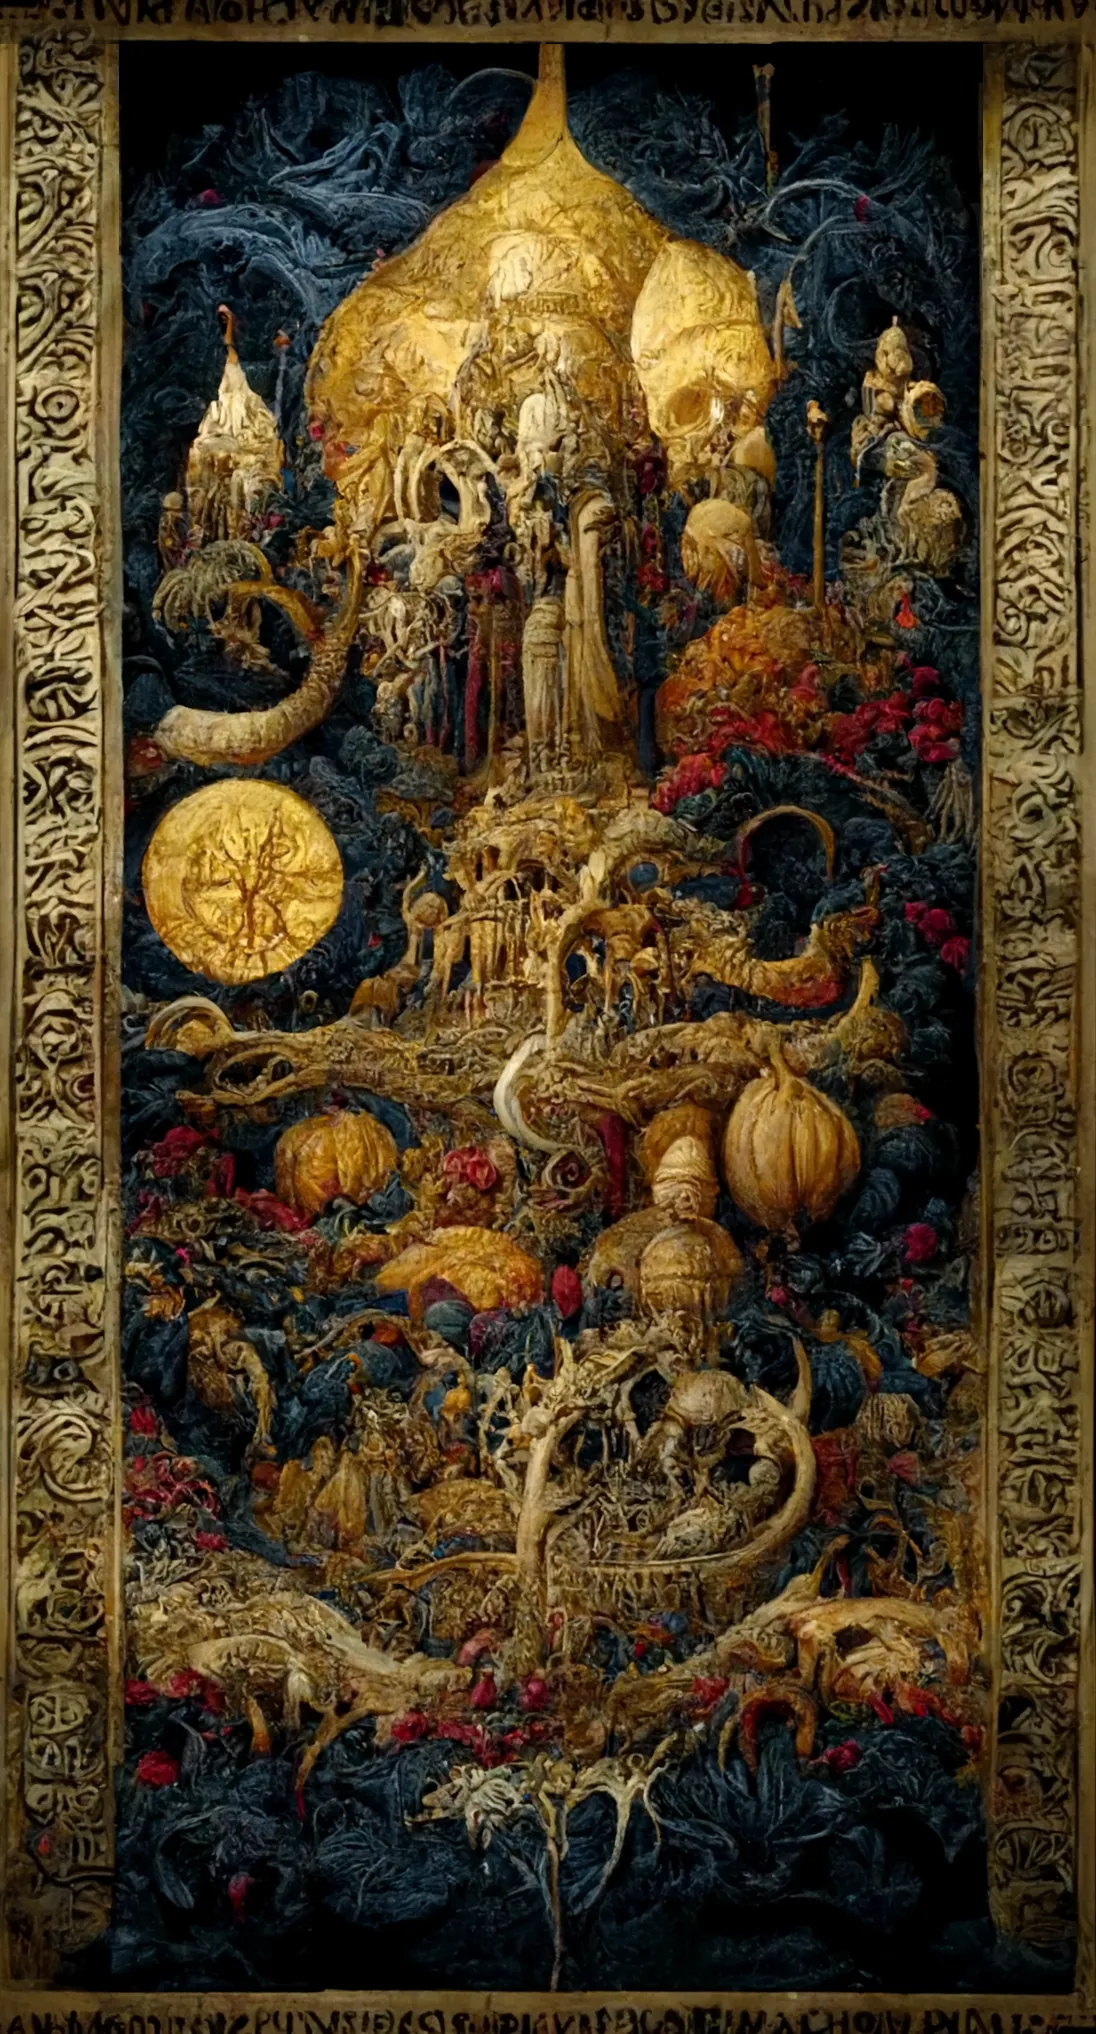 South Netherlandish Workshop | The Three Realms (ca.1480) | Wool, silk, and gold threading